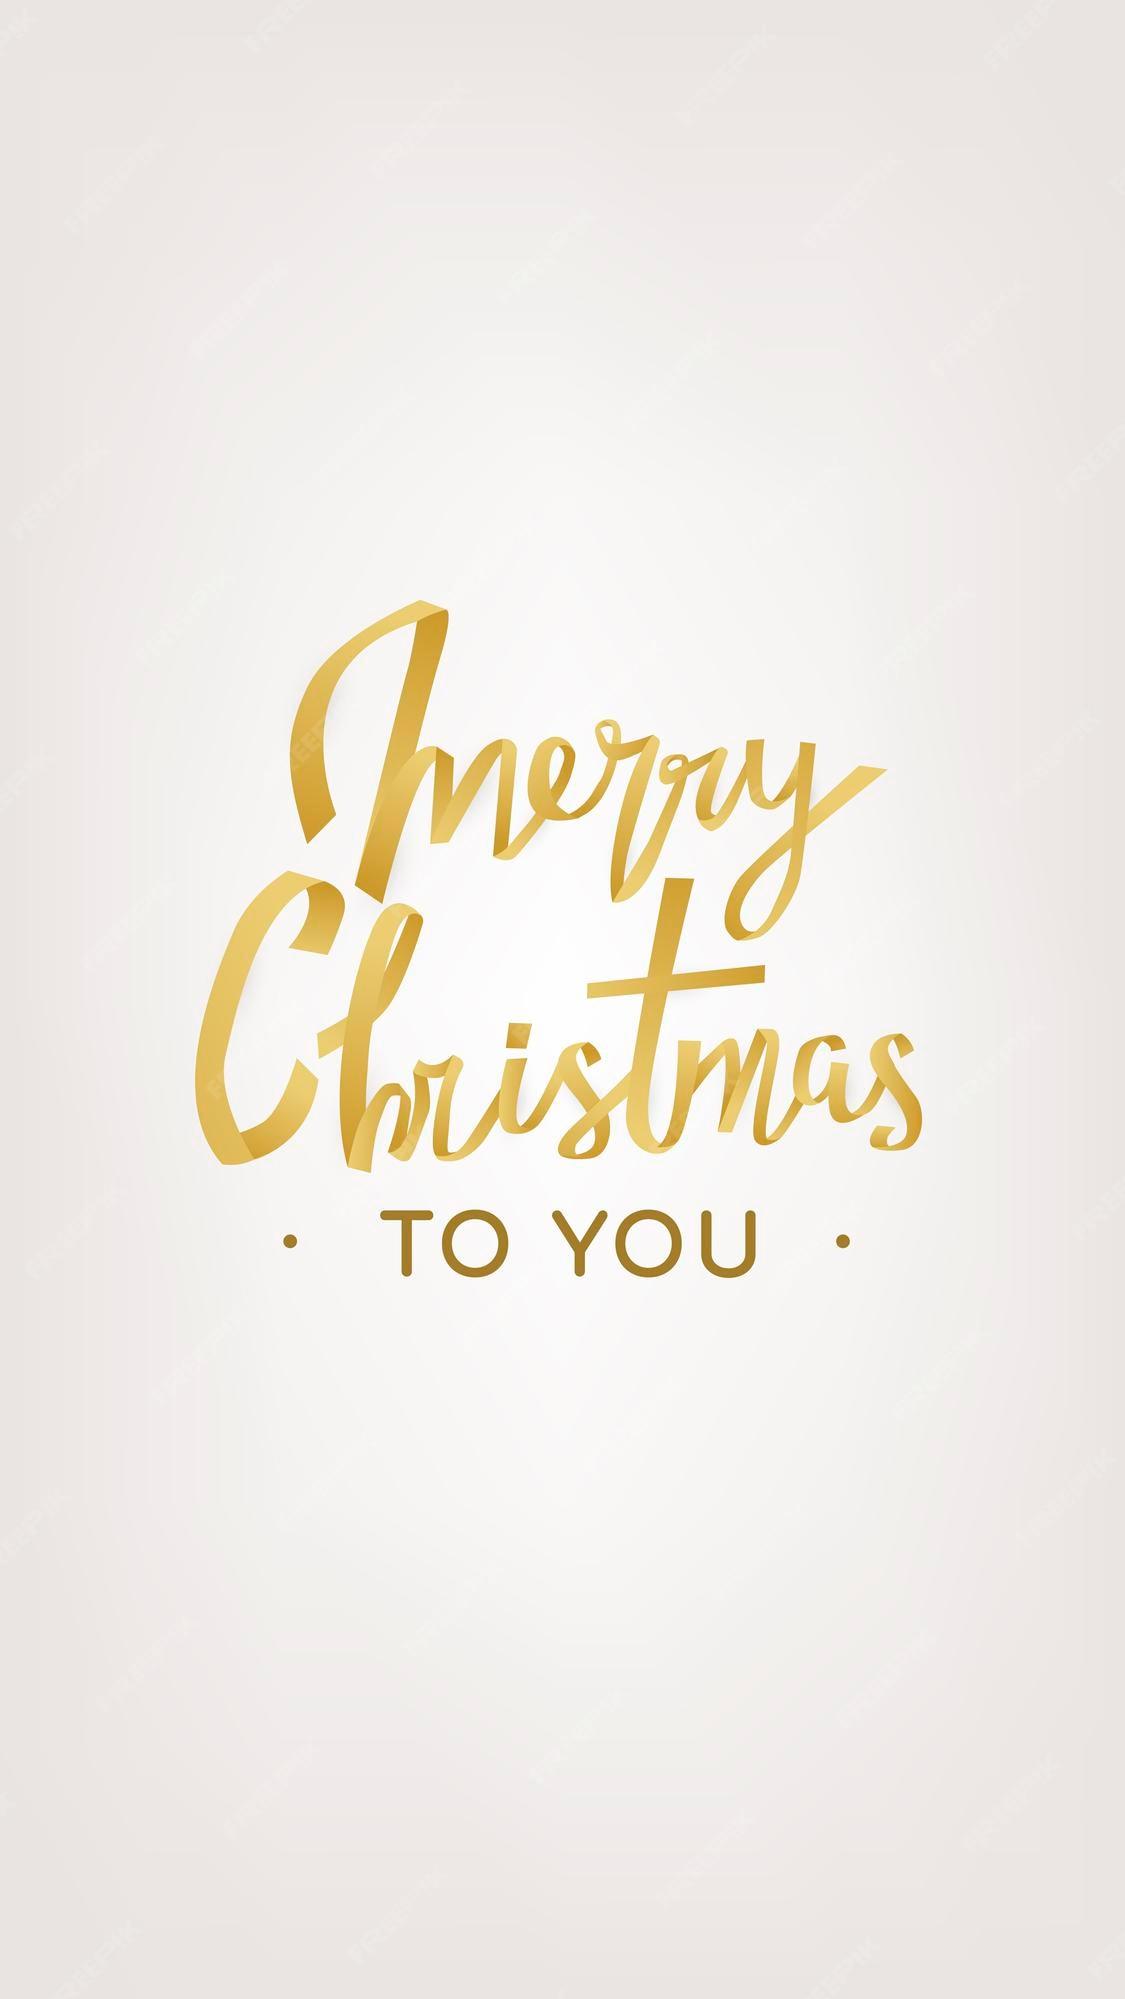 Free Vector Merry christmas iphone wallpaper holiday greeting